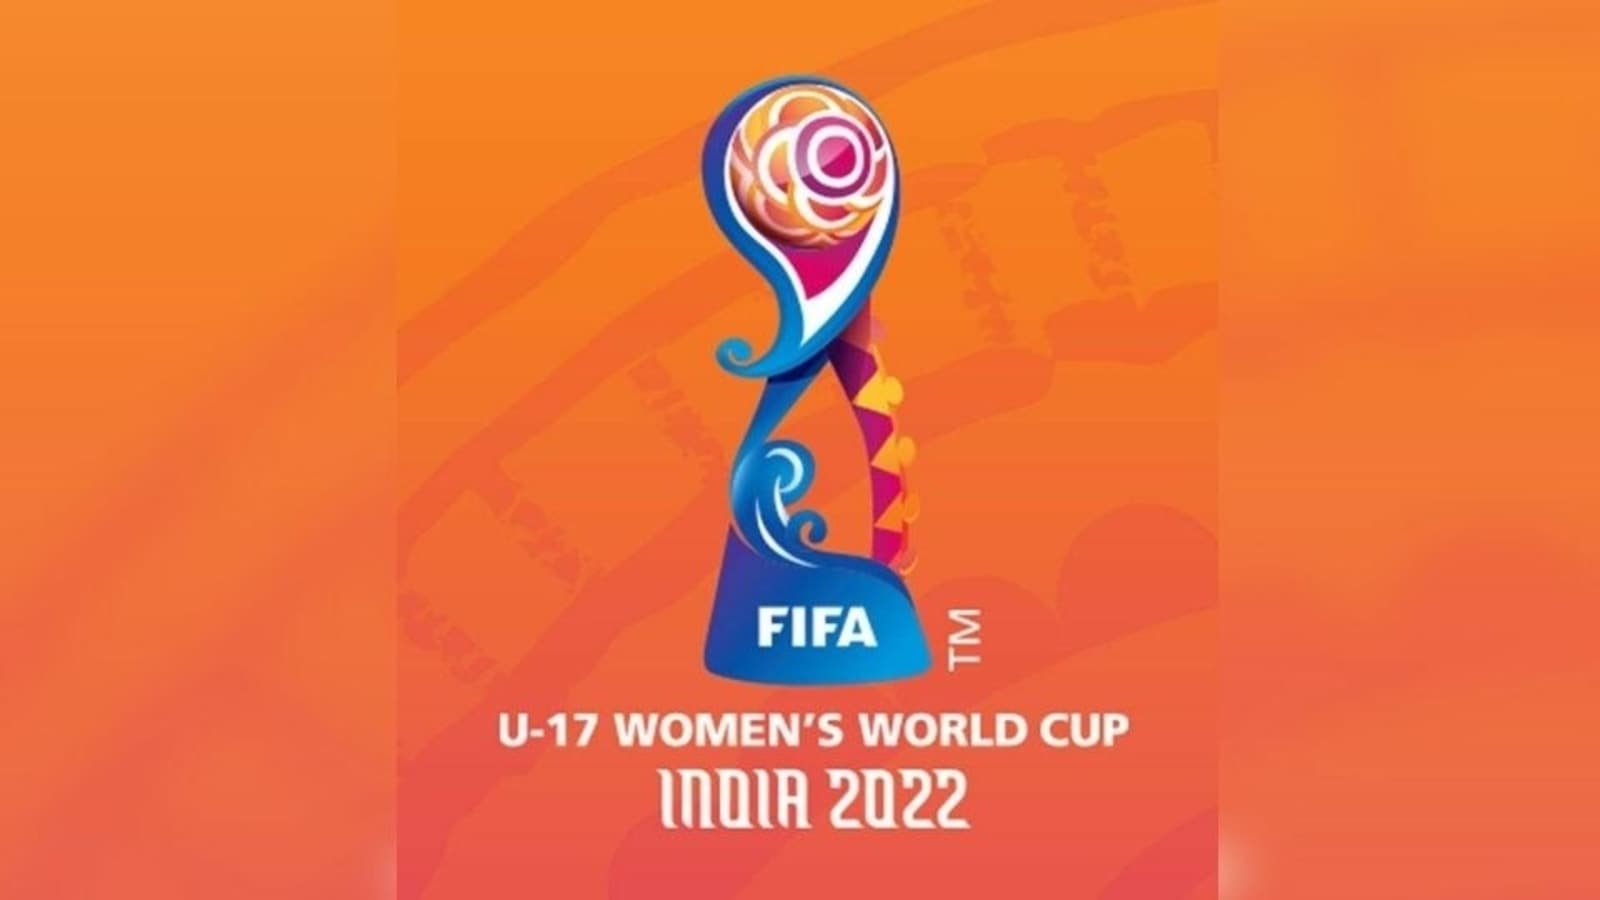 U17 Women's World Cup to be held in India in October 2022 FIFA